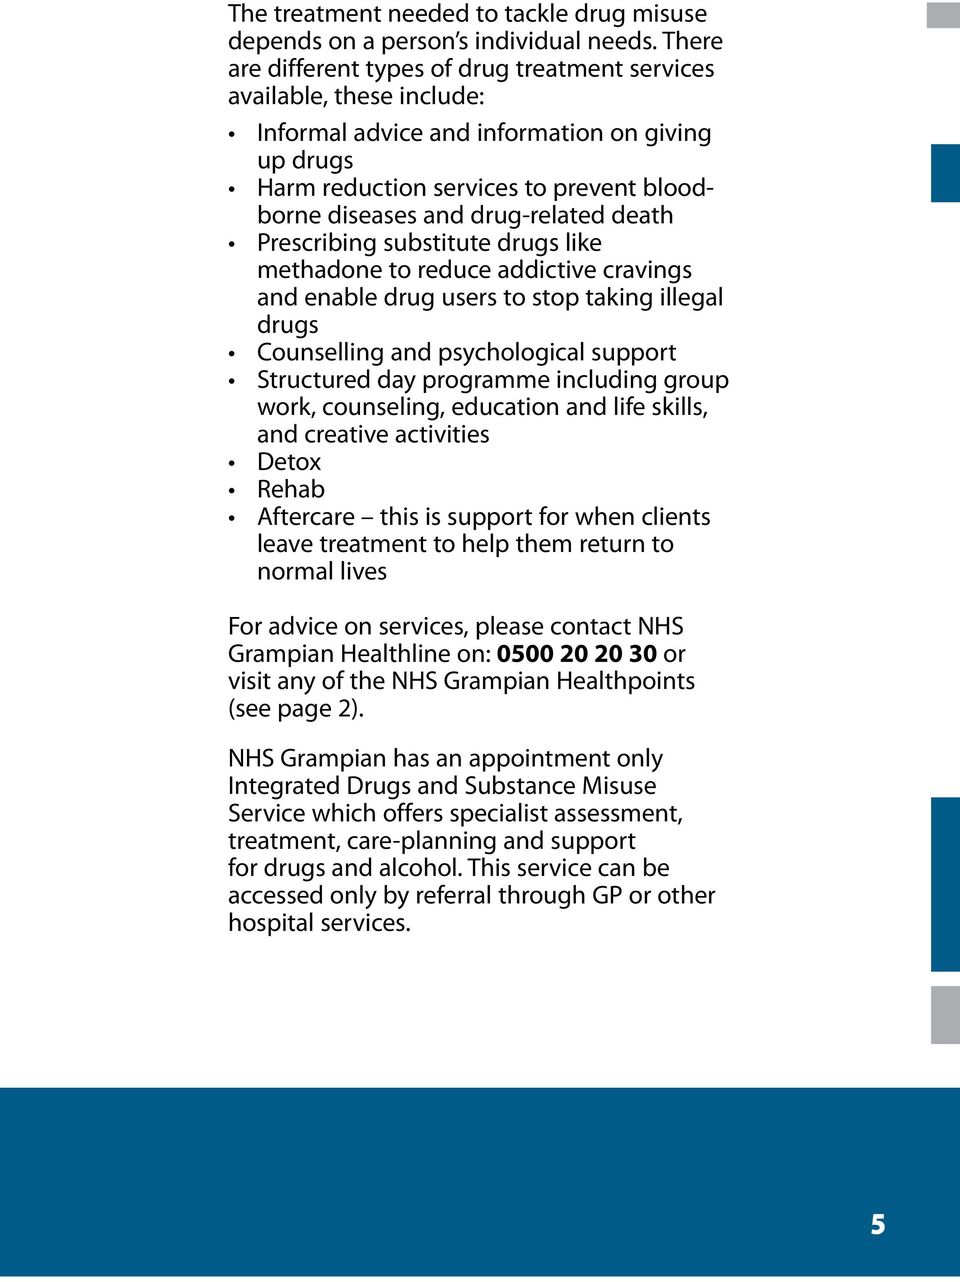 drug-related death Prescribing substitute drugs like methadone to reduce addictive cravings and enable drug users to stop taking illegal drugs Counselling and psychological support Structured day